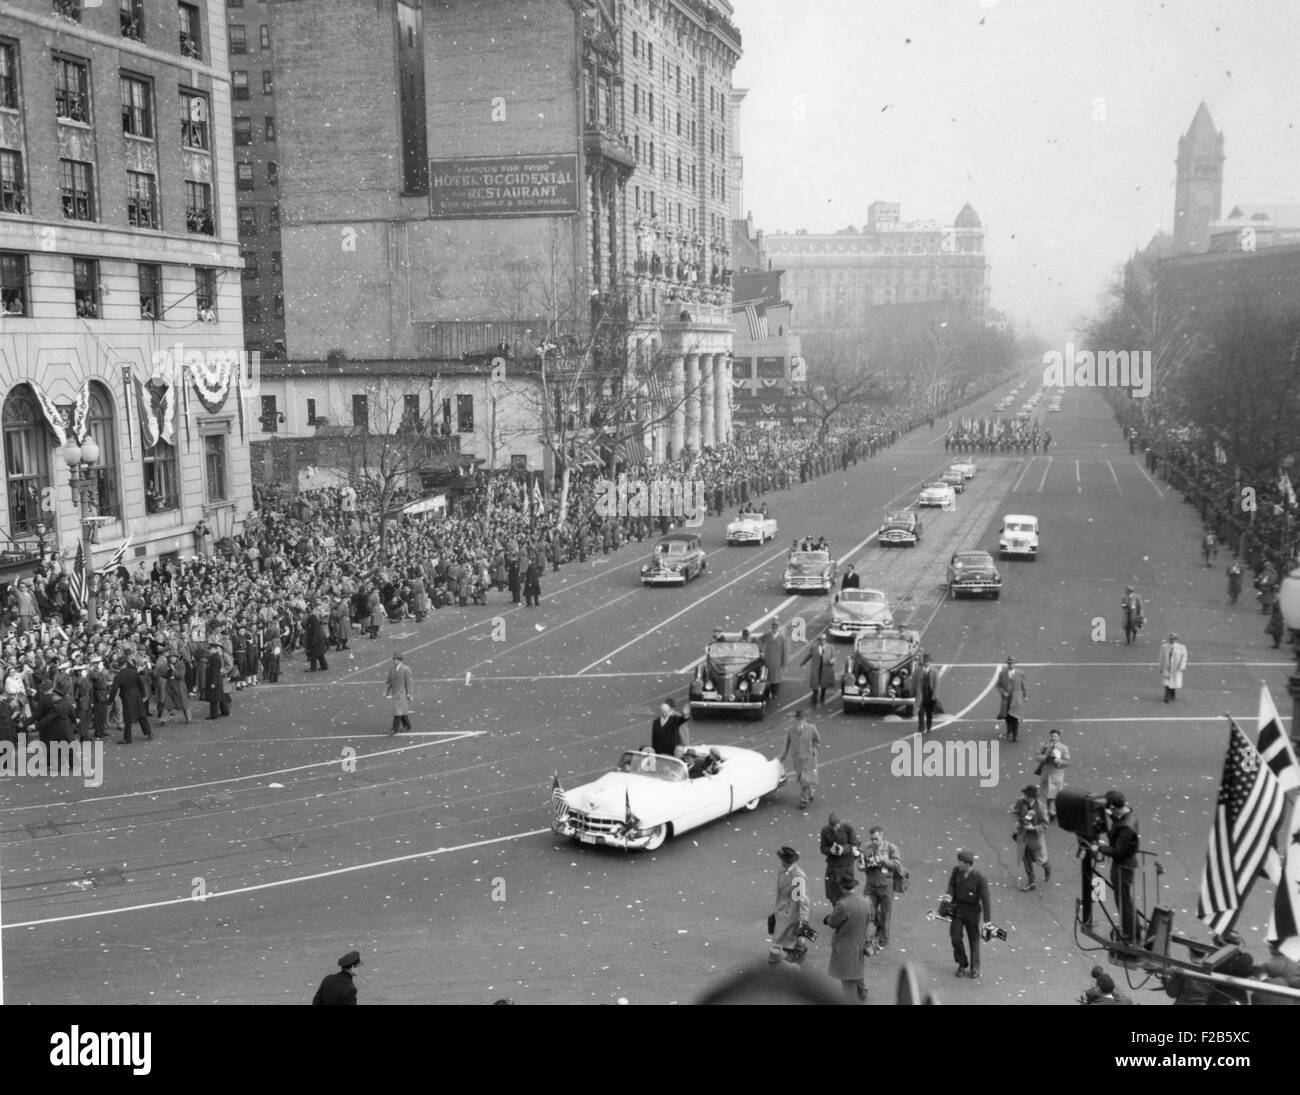 President Eisenhower standing in an open car in the inaugural parade. Jan. 20, 1953. Eisenhower's Car leads the parade which stretches back to Capitol Hill on Pennsylvania Avenue. - (BSLOC 2014 16 24) Stock Photo